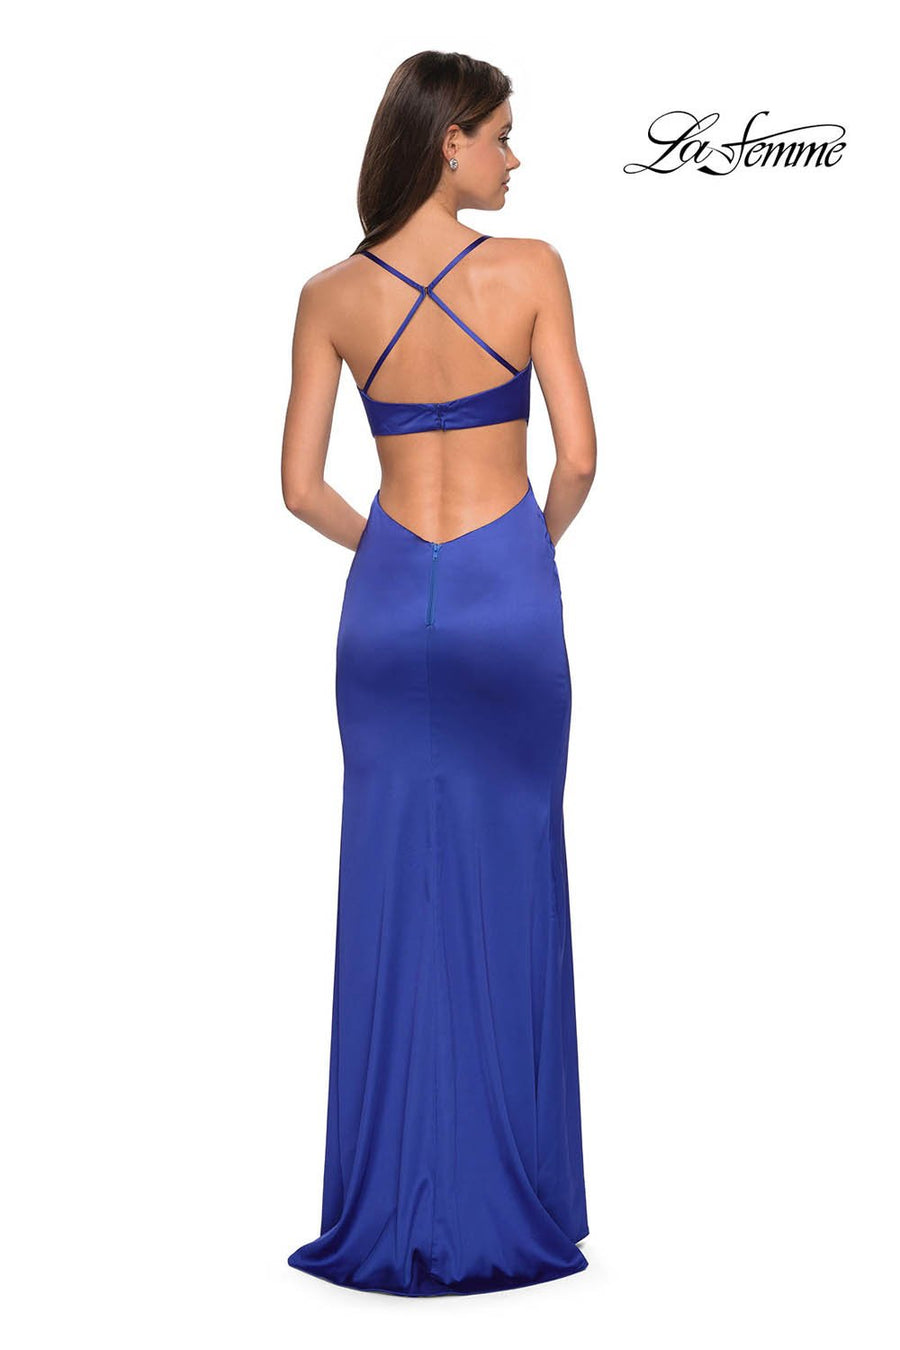 La Femme 27682 prom dress images.  La Femme 27682 is available in these colors: Hot Fuchsia, Royal Blue.